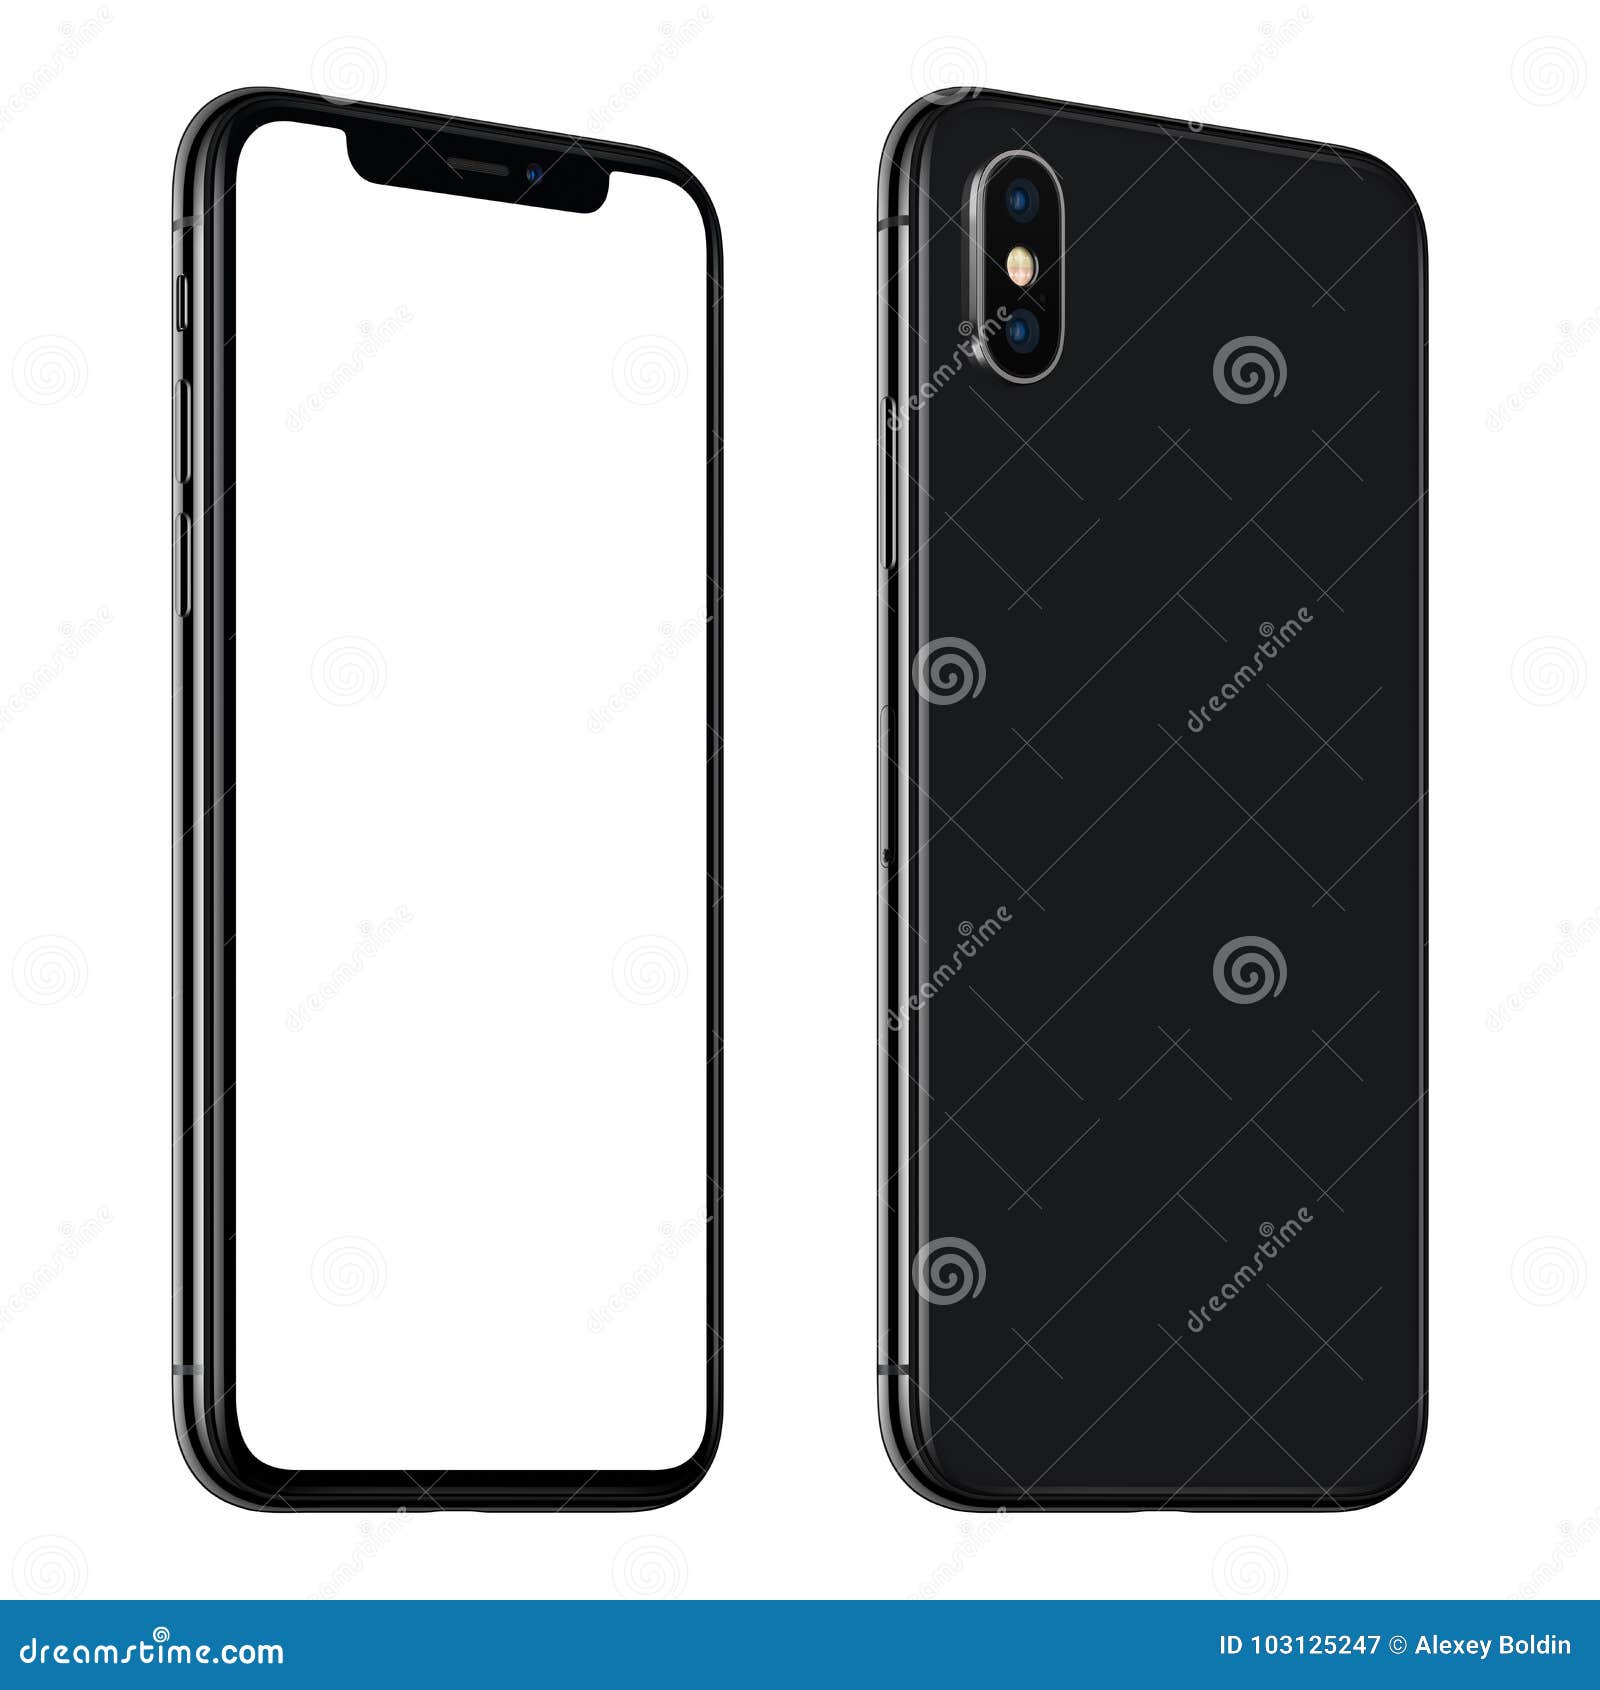 new black smartphone similar to iphone x mockup front and back sides ccw rotated  on white background